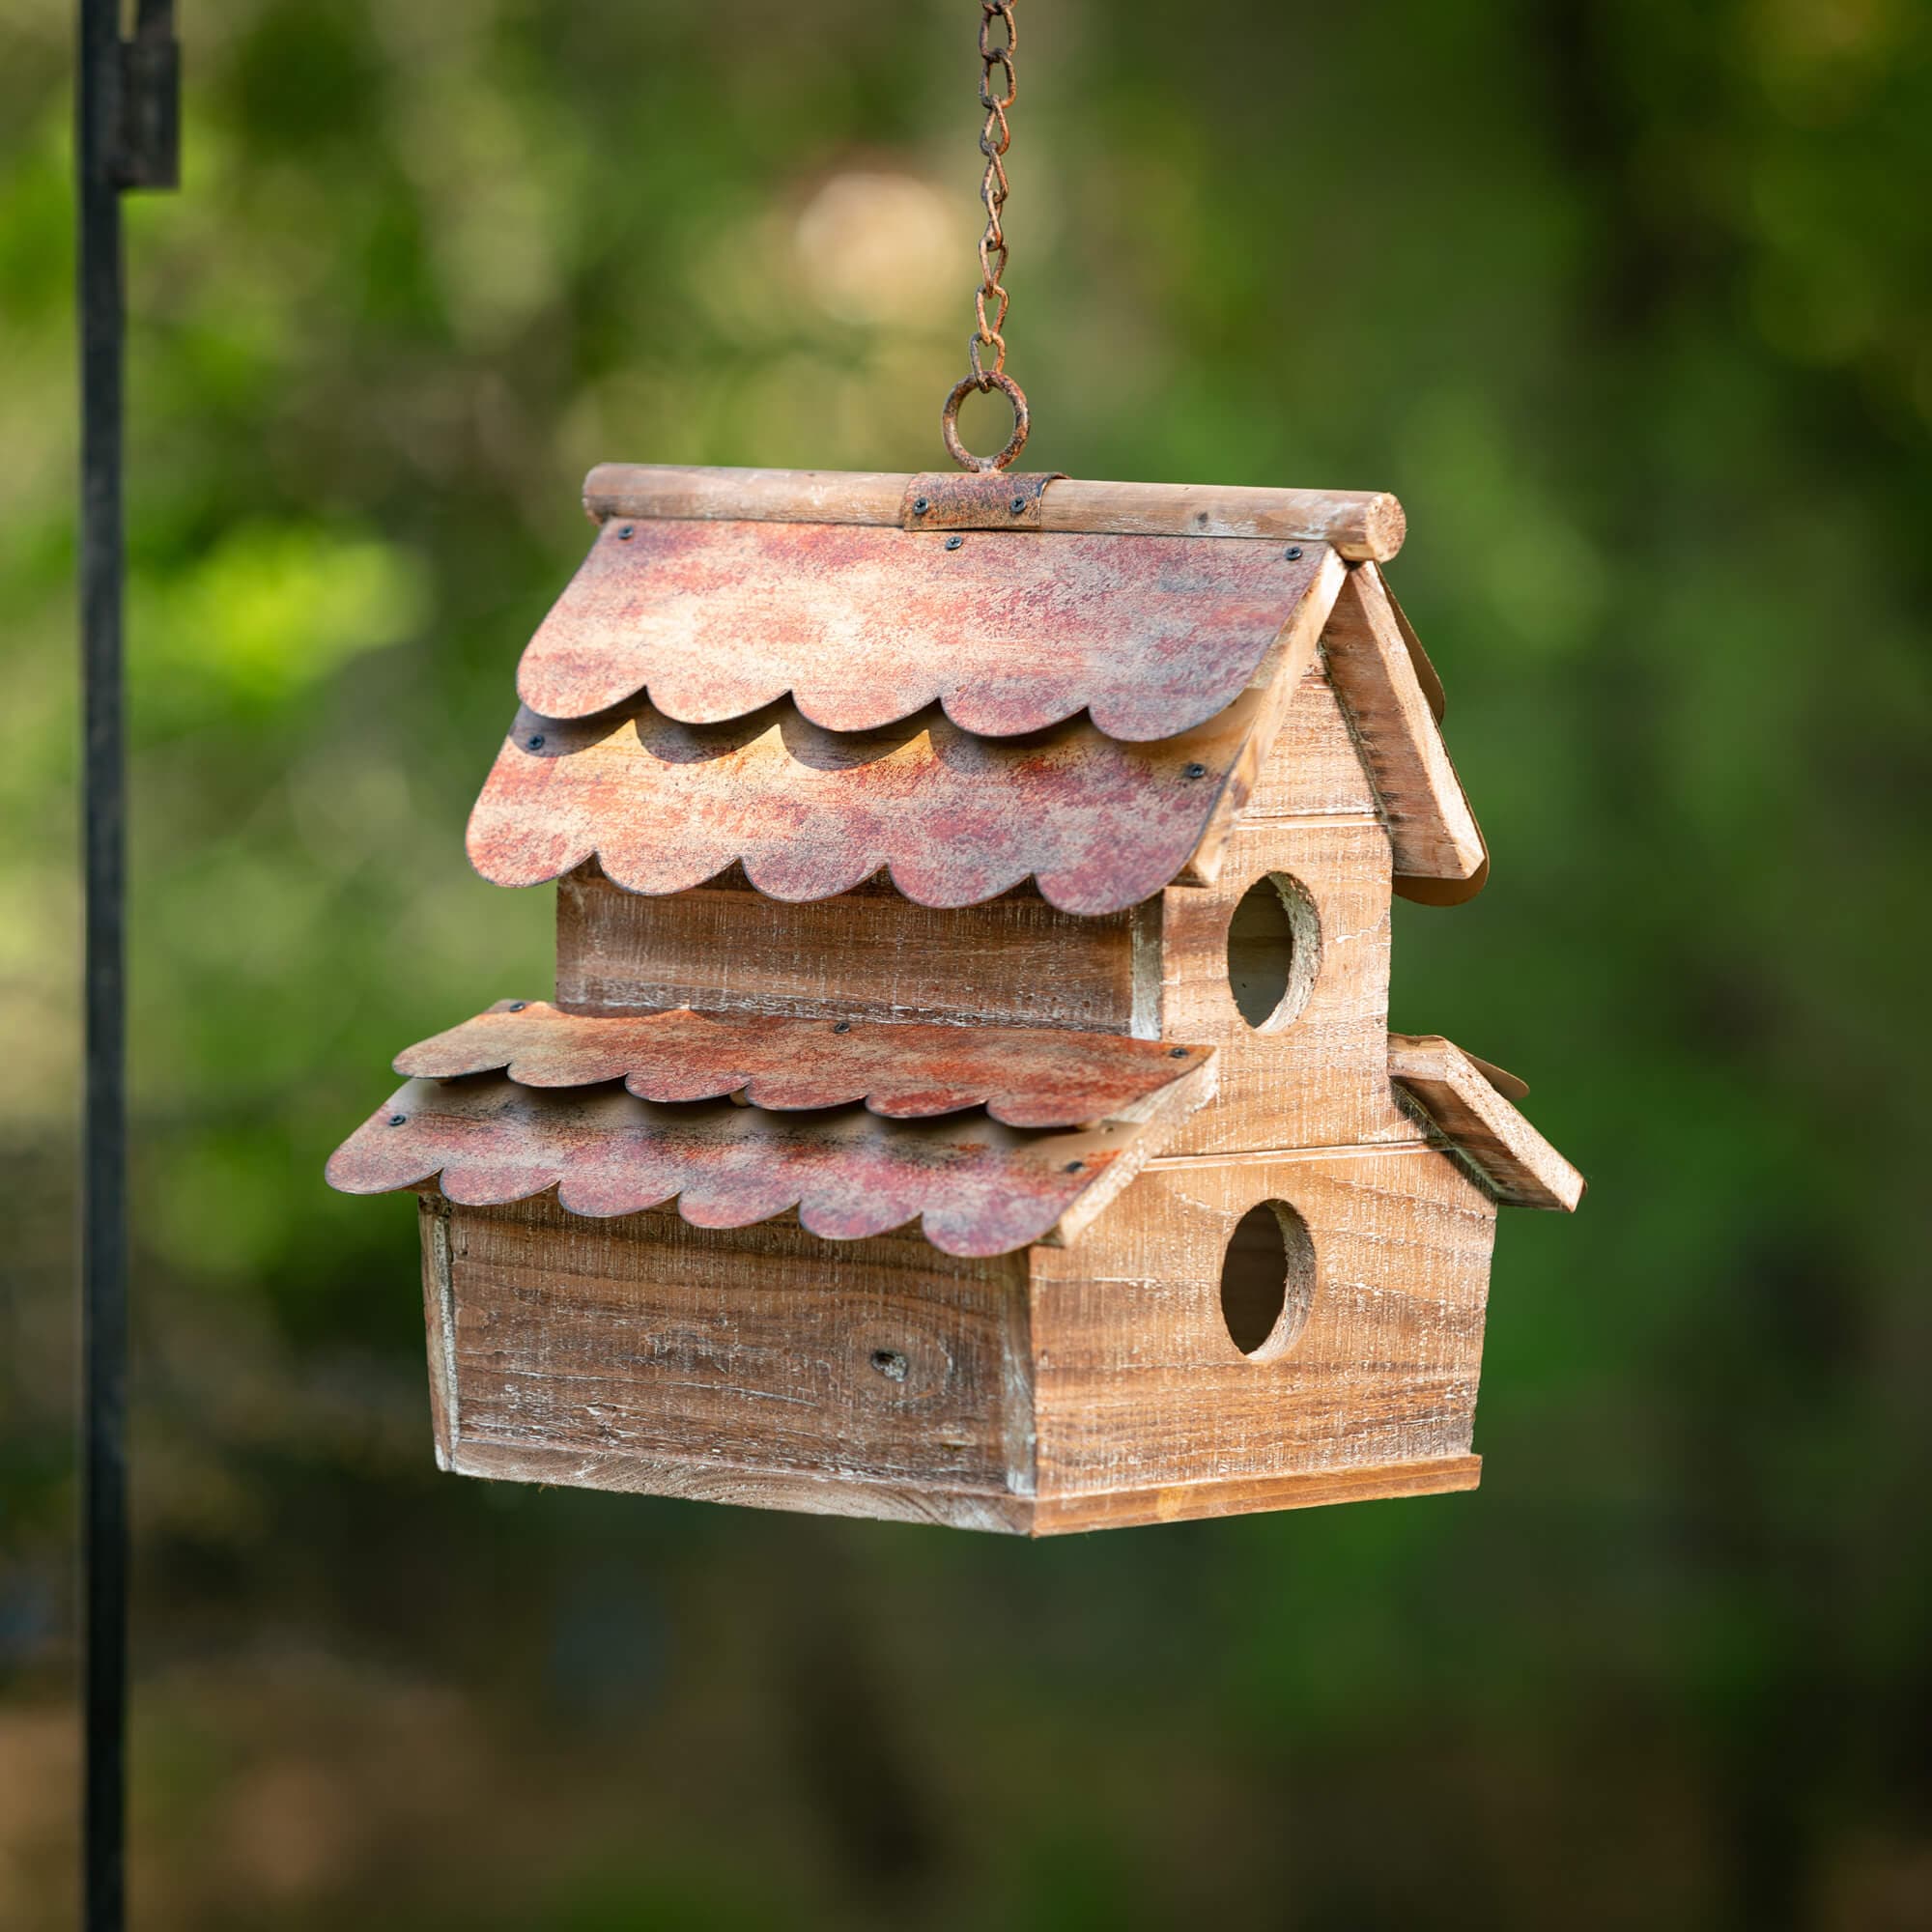 Copper Shingled Roof Wooden Birdhouse Elevate Home Decor - Outdoors